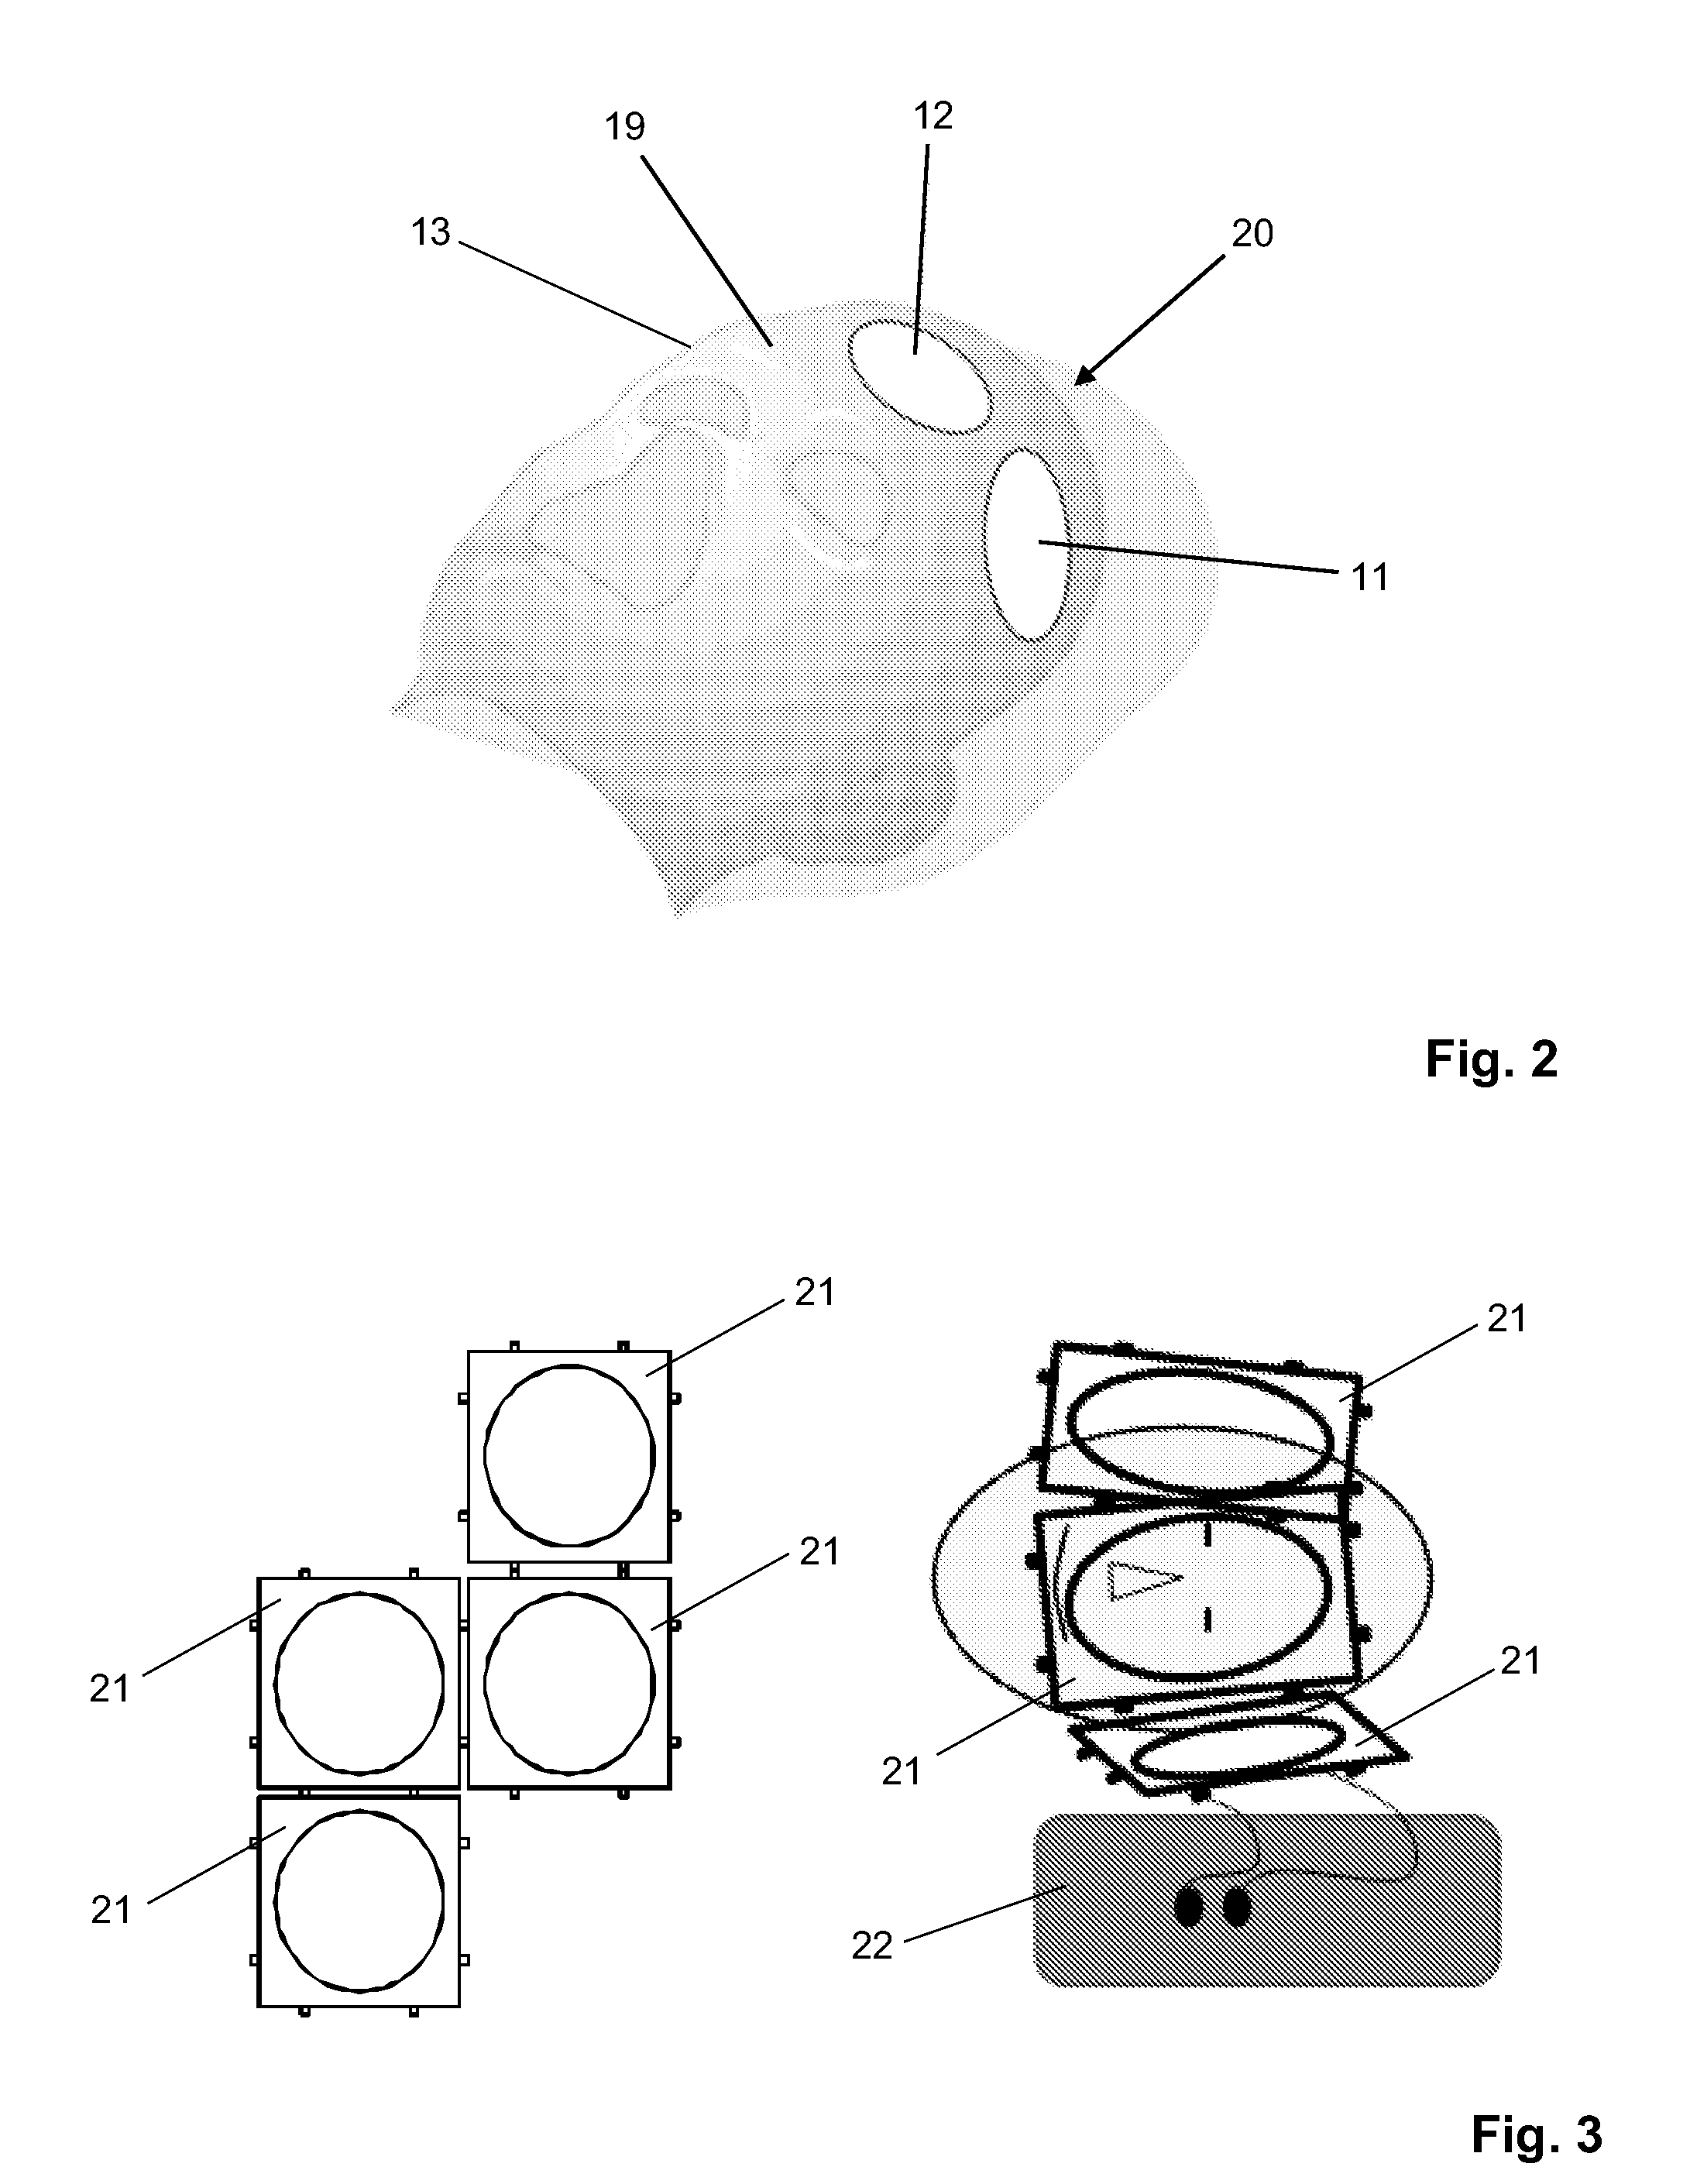 Method of producing personalized RF coil array for MR imaging guided interventions